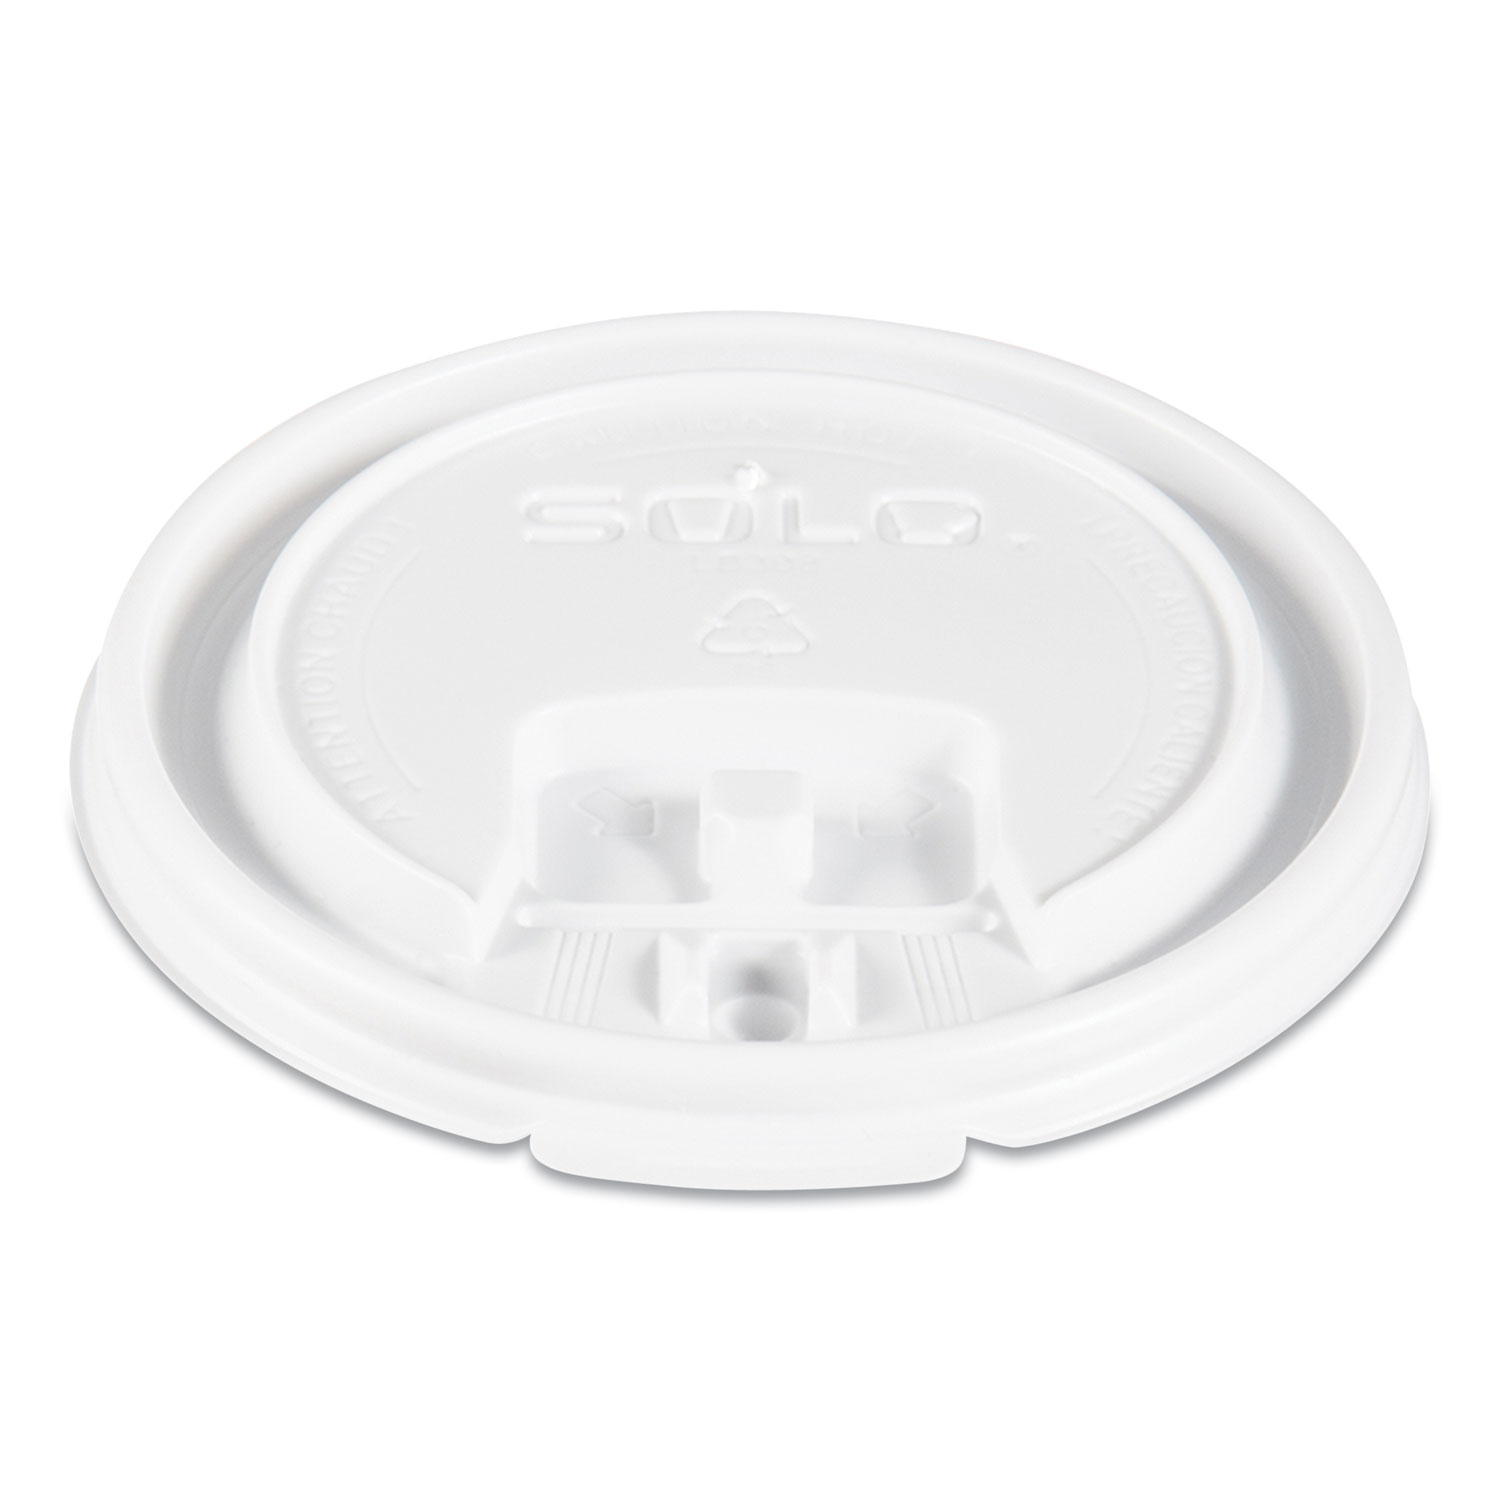  Dart LB3081-00007 Lift Back and Lock Tab Cup Lids, for 8oz Cups, White, 100/Sleeve, 10 Sleeves/CT (SCCLB3081) 